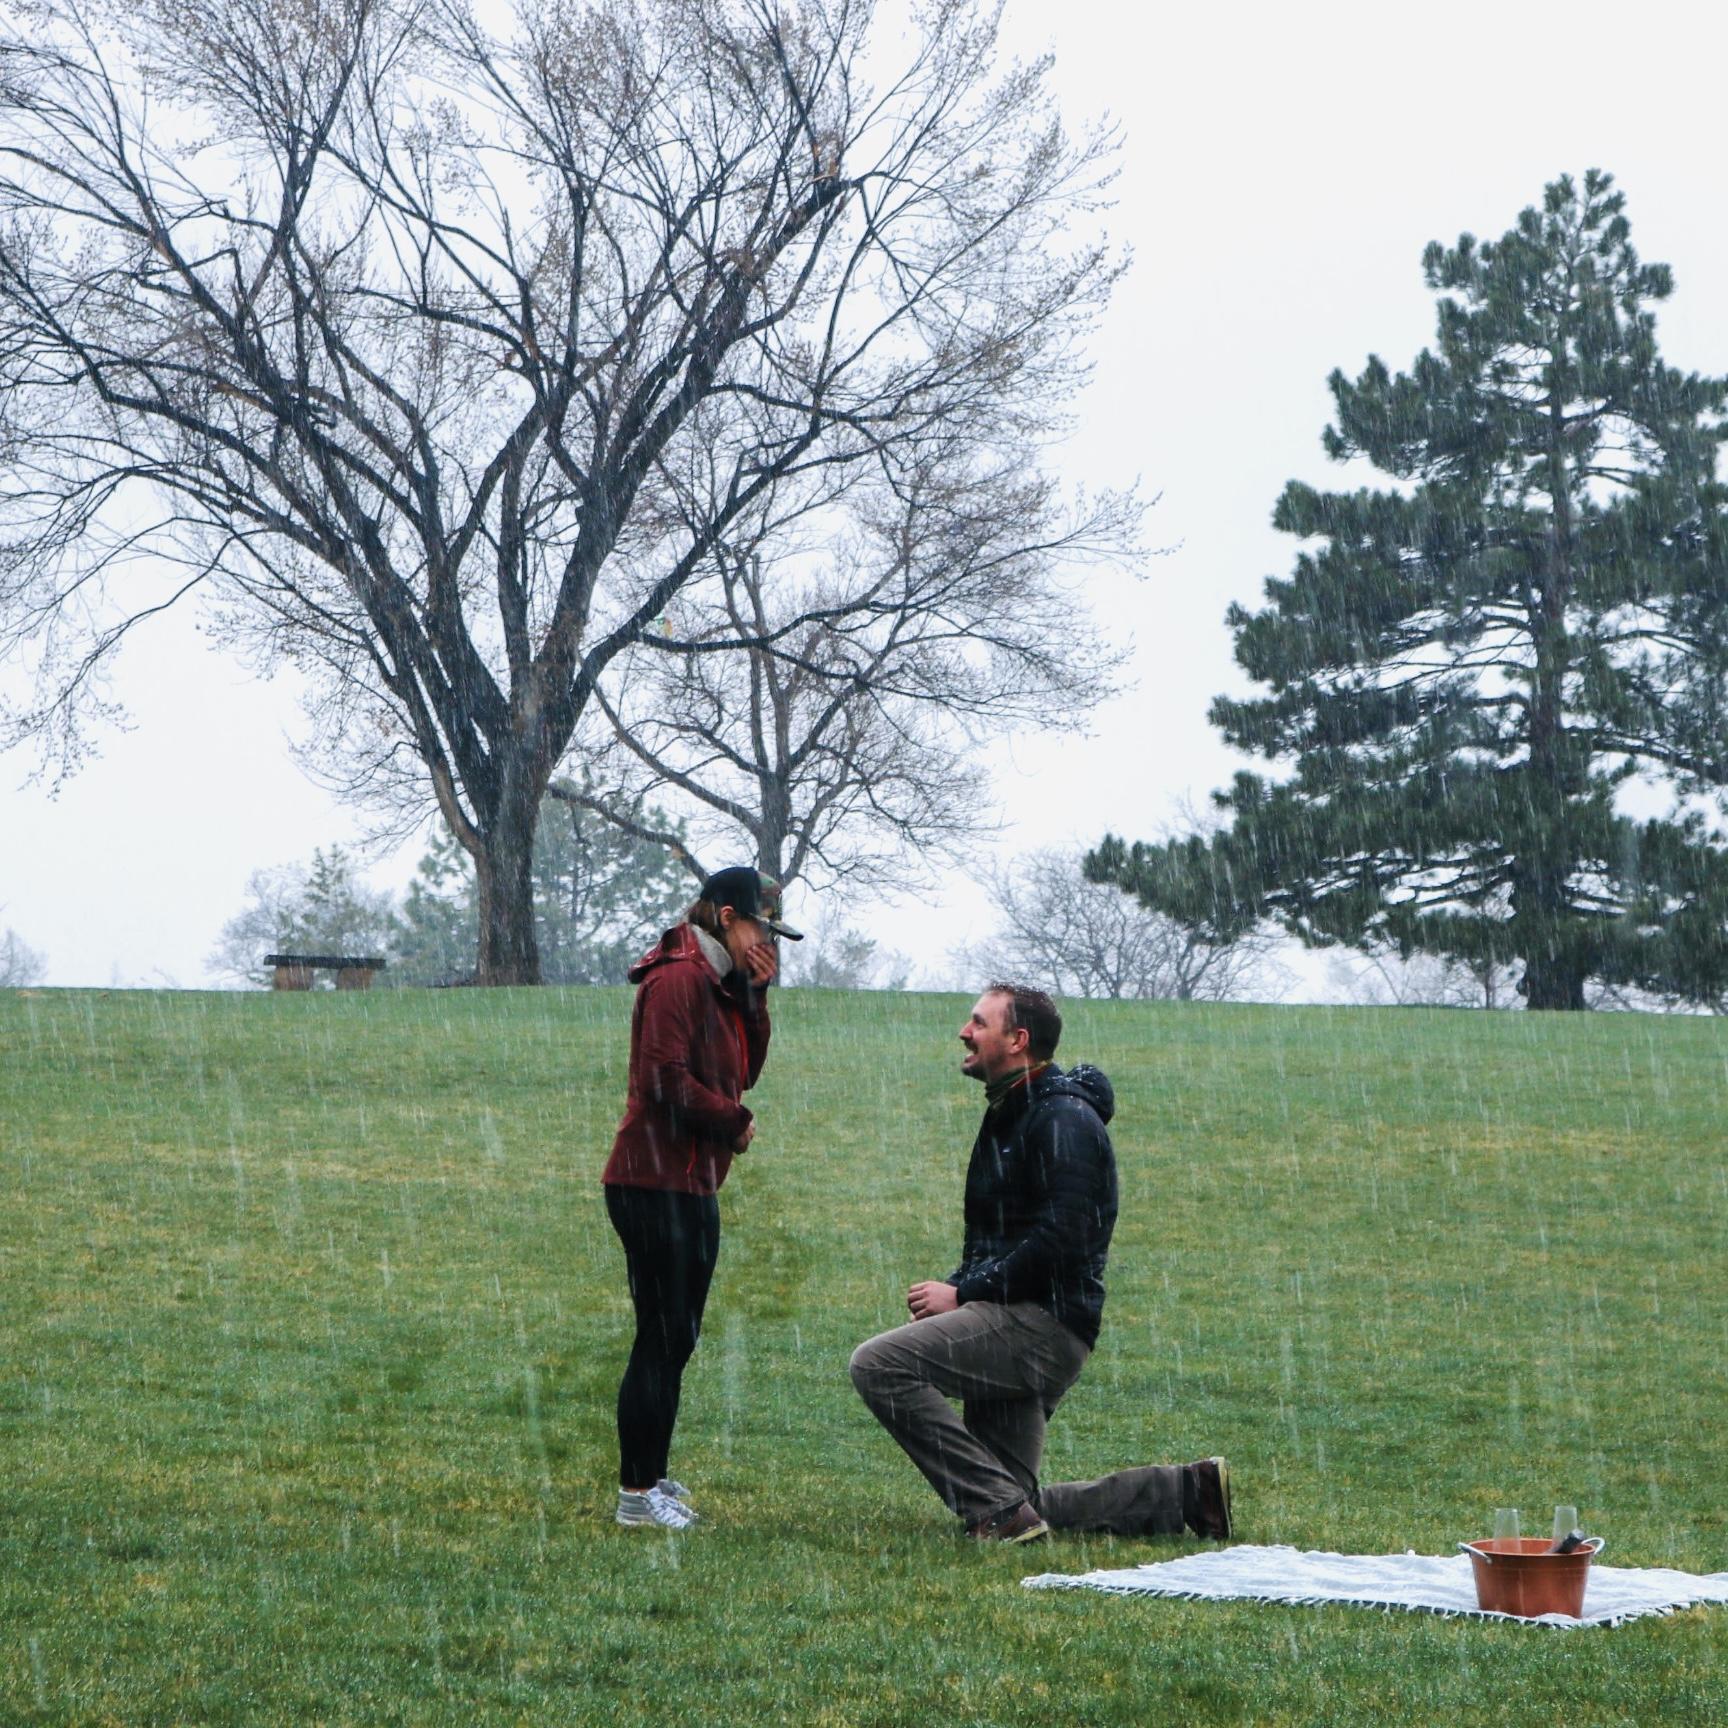 Cyril proposed to Jenn on April 15th, 2021 at City Park in Fort Collins, where they had their first date.